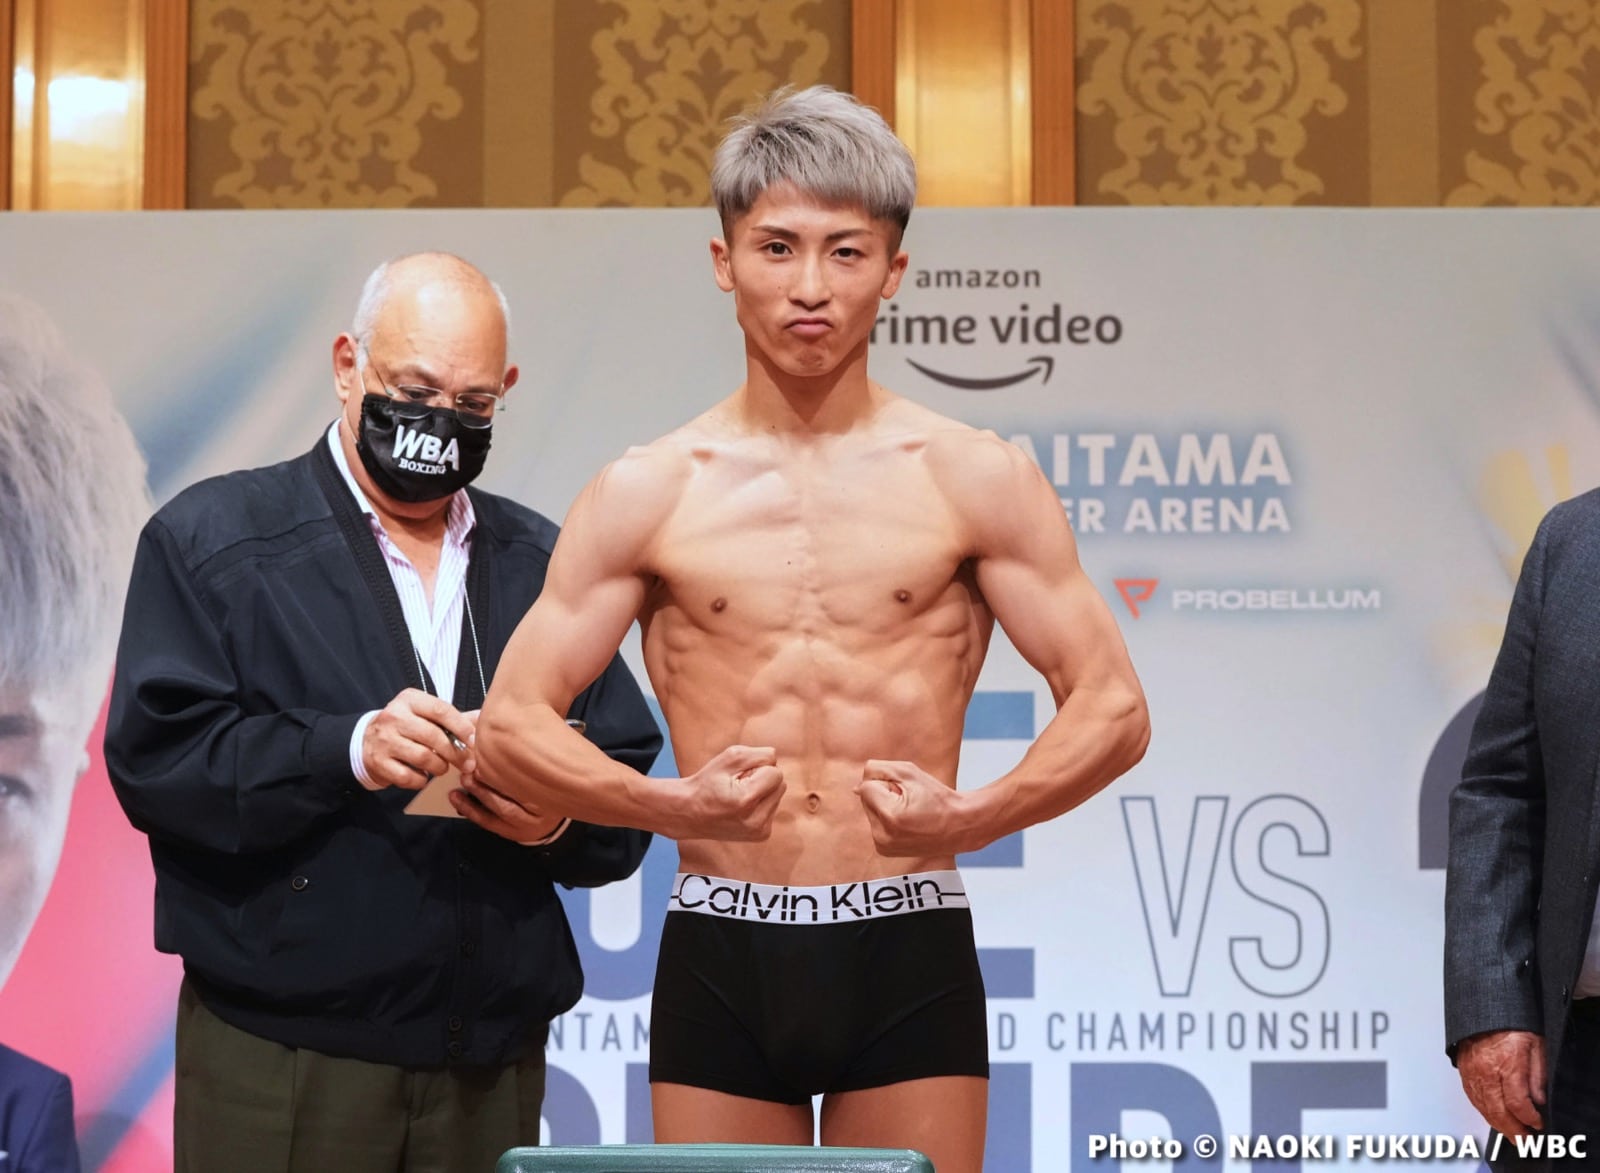 Image: Inoue - Donaire II Official ESPN+ Weigh In Results